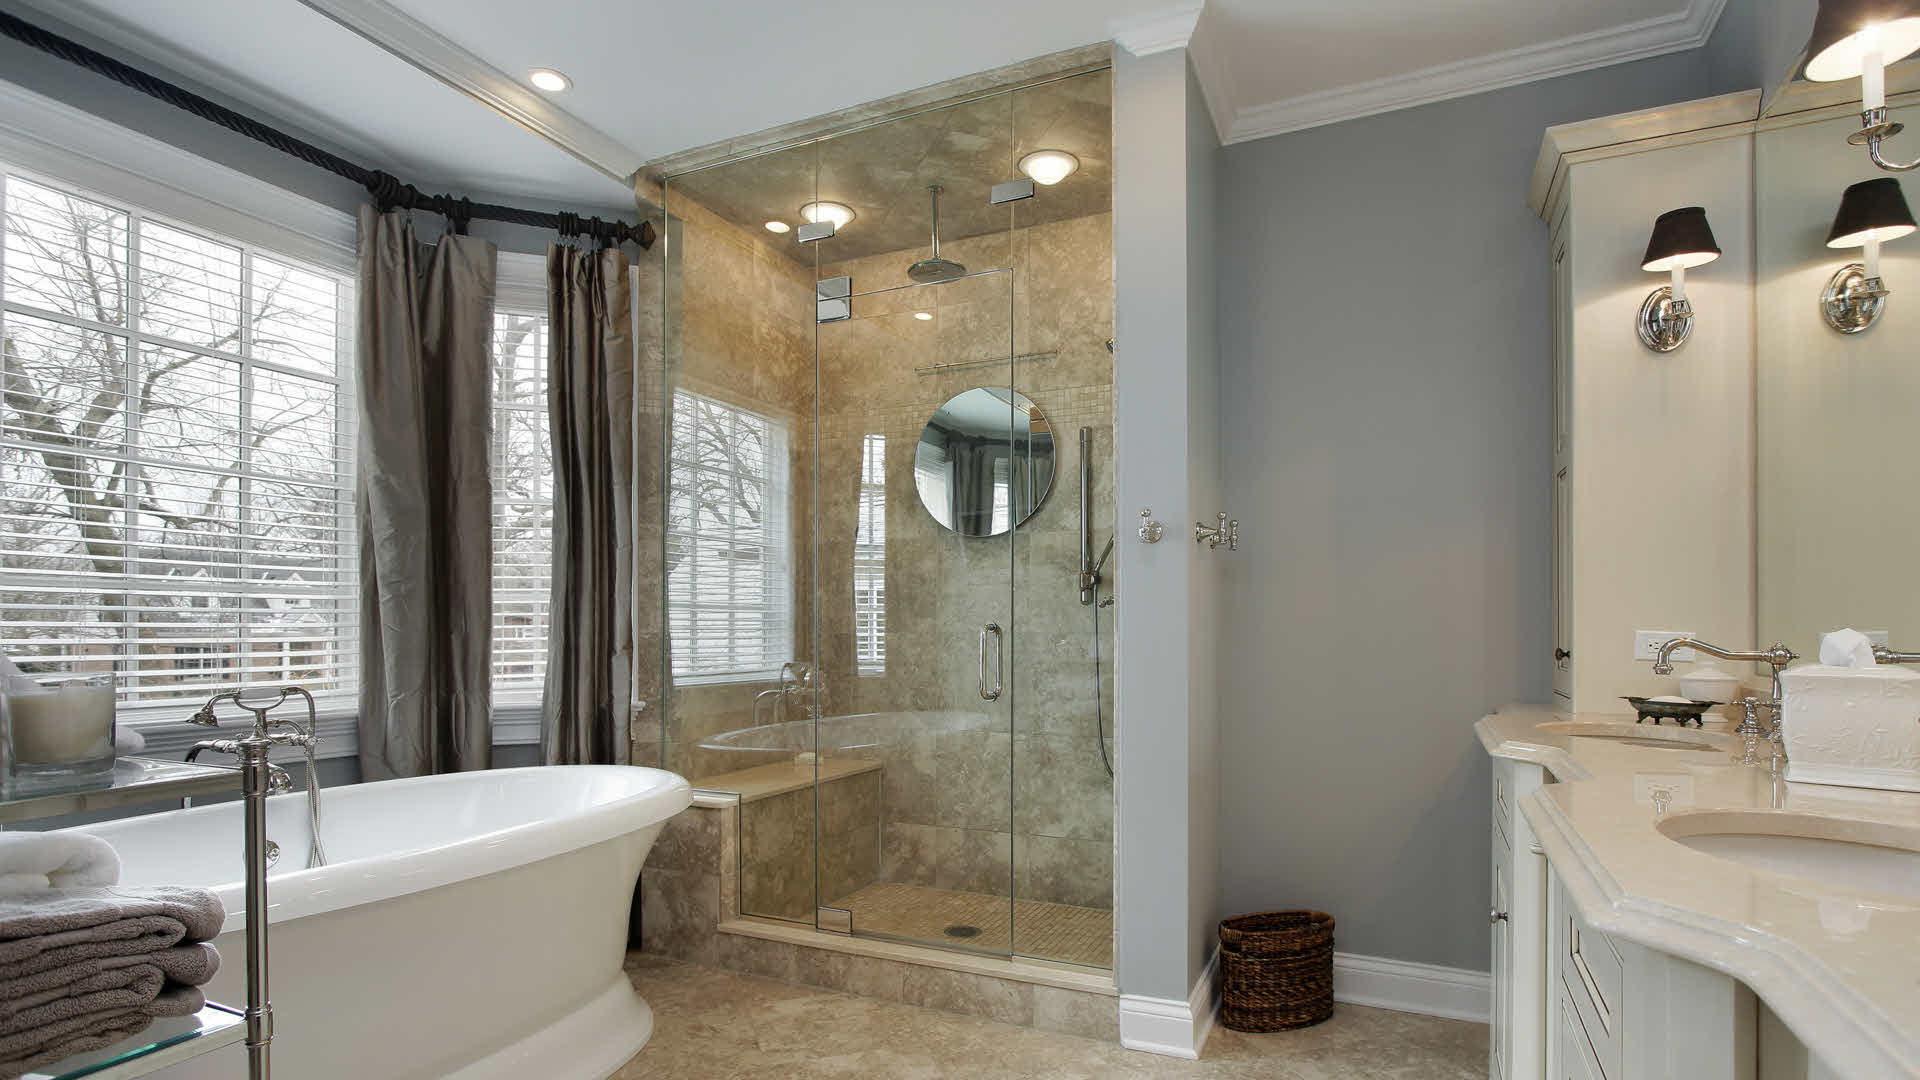 Need to make your bathtub or shower accessible for your aging body? We have bathing & shower solutions to help you enjoy the golden years at home.